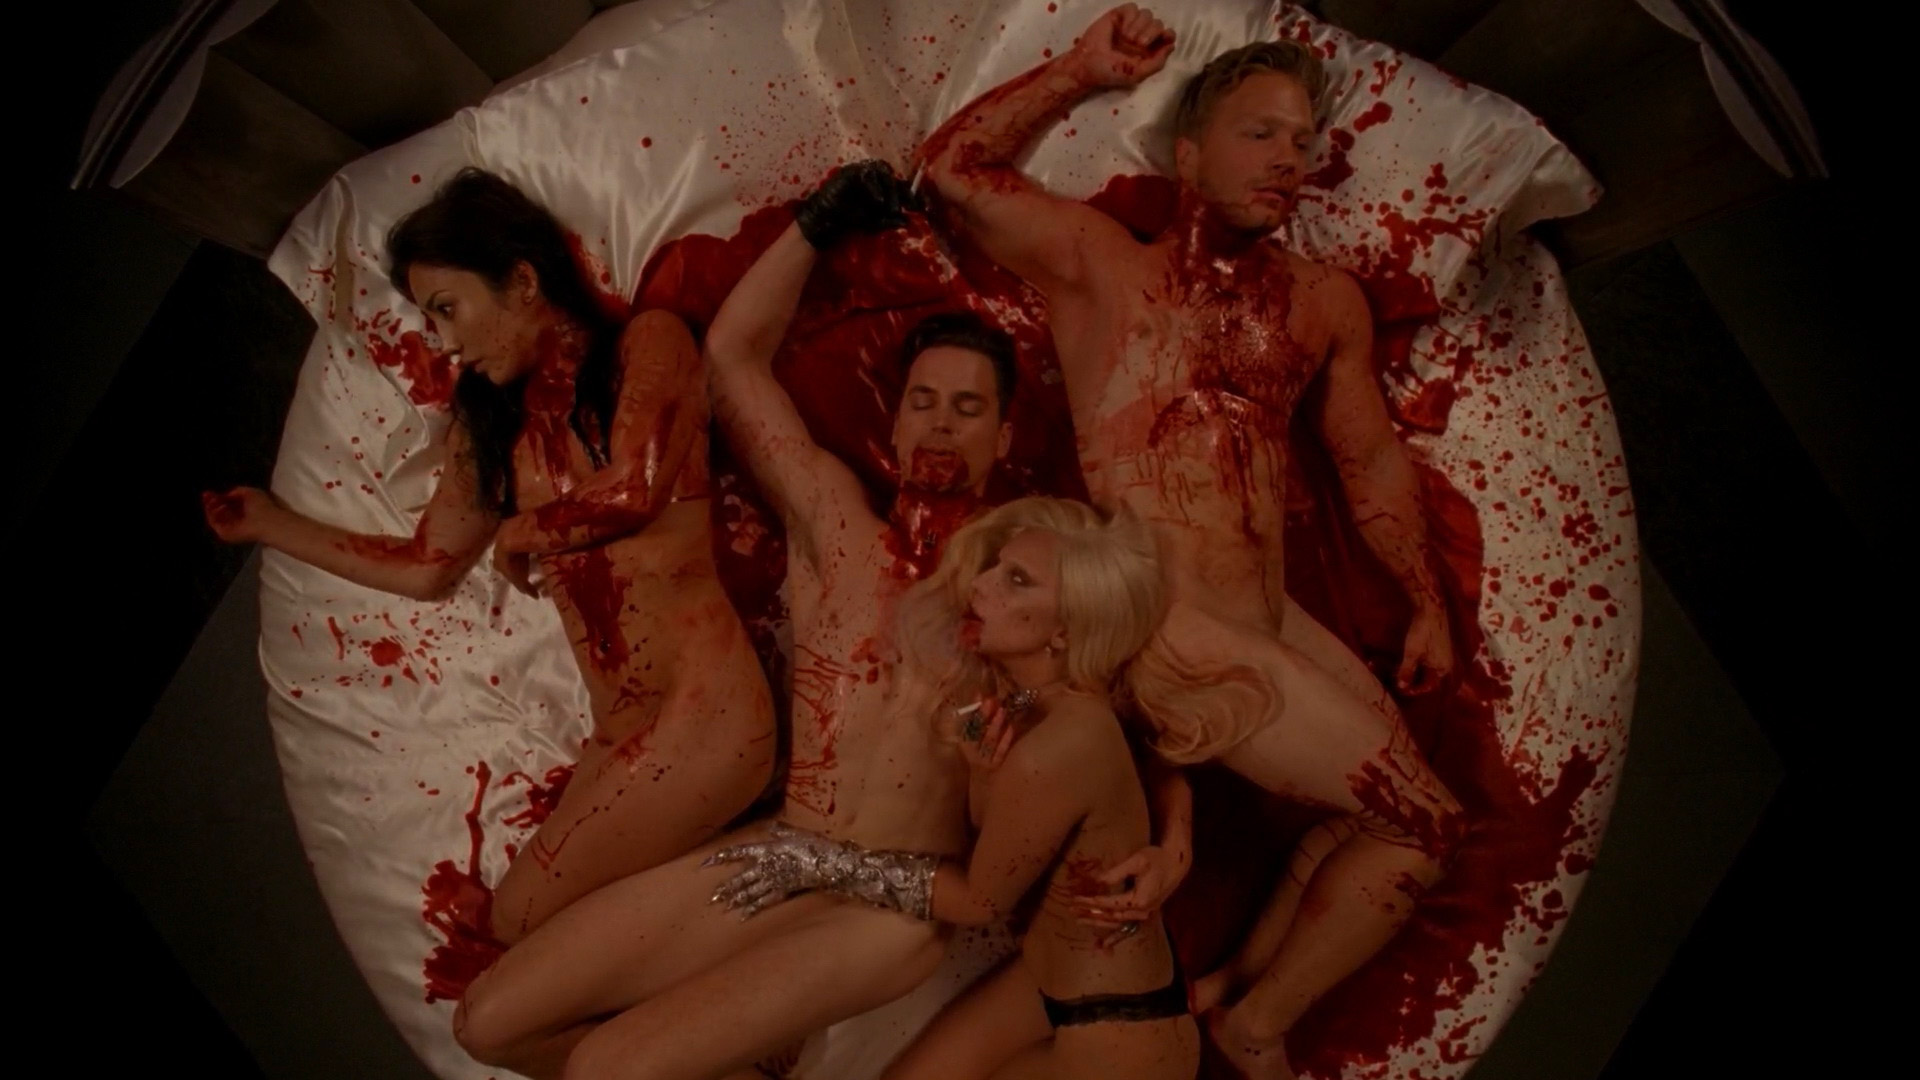 craig kaster recommends american horror story nude scenes pic